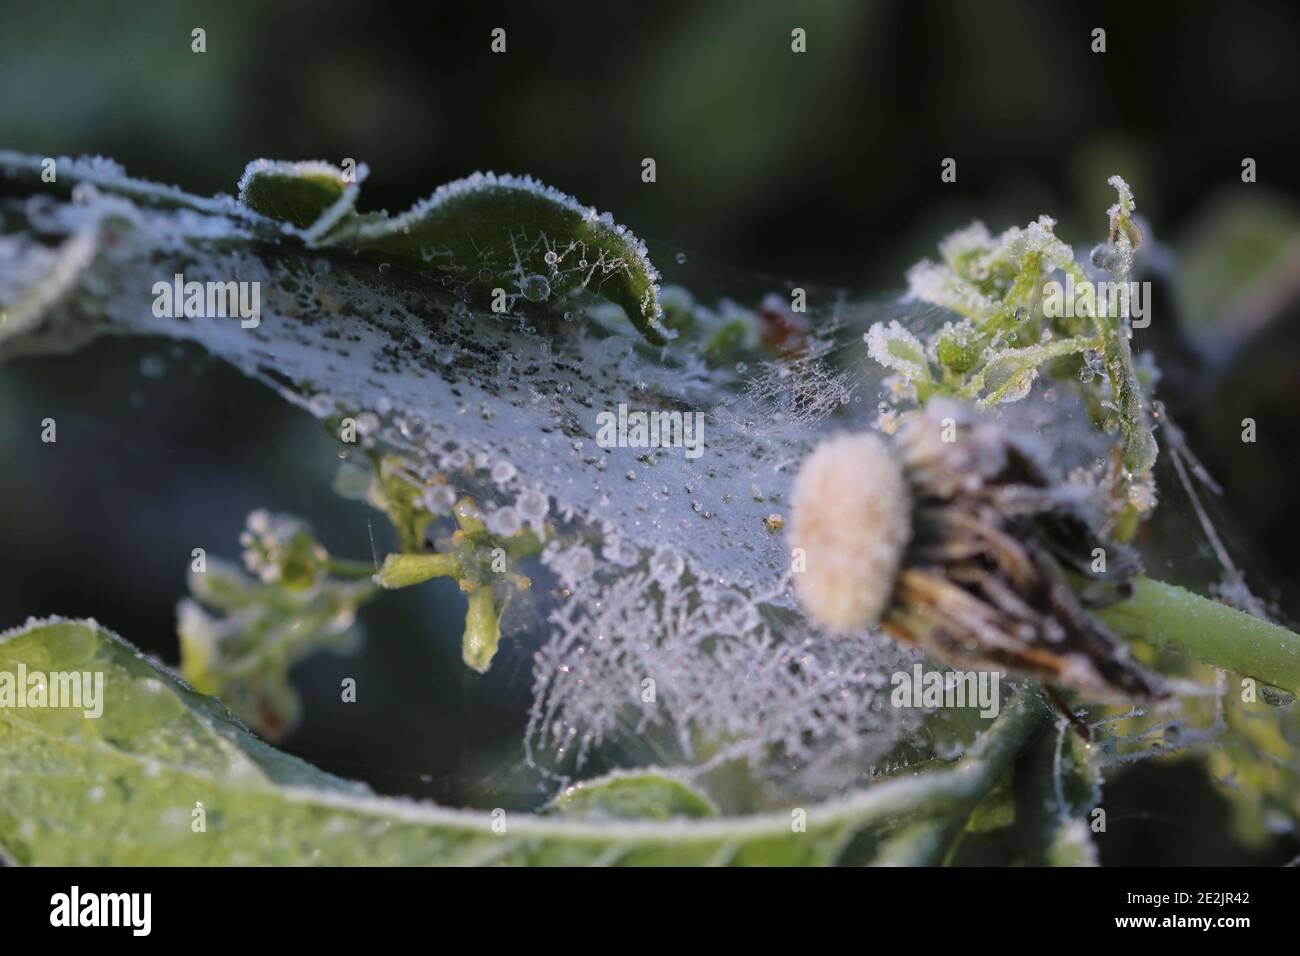 close up of a frozen leaf and a dandelion head in the foreground Stock Photo